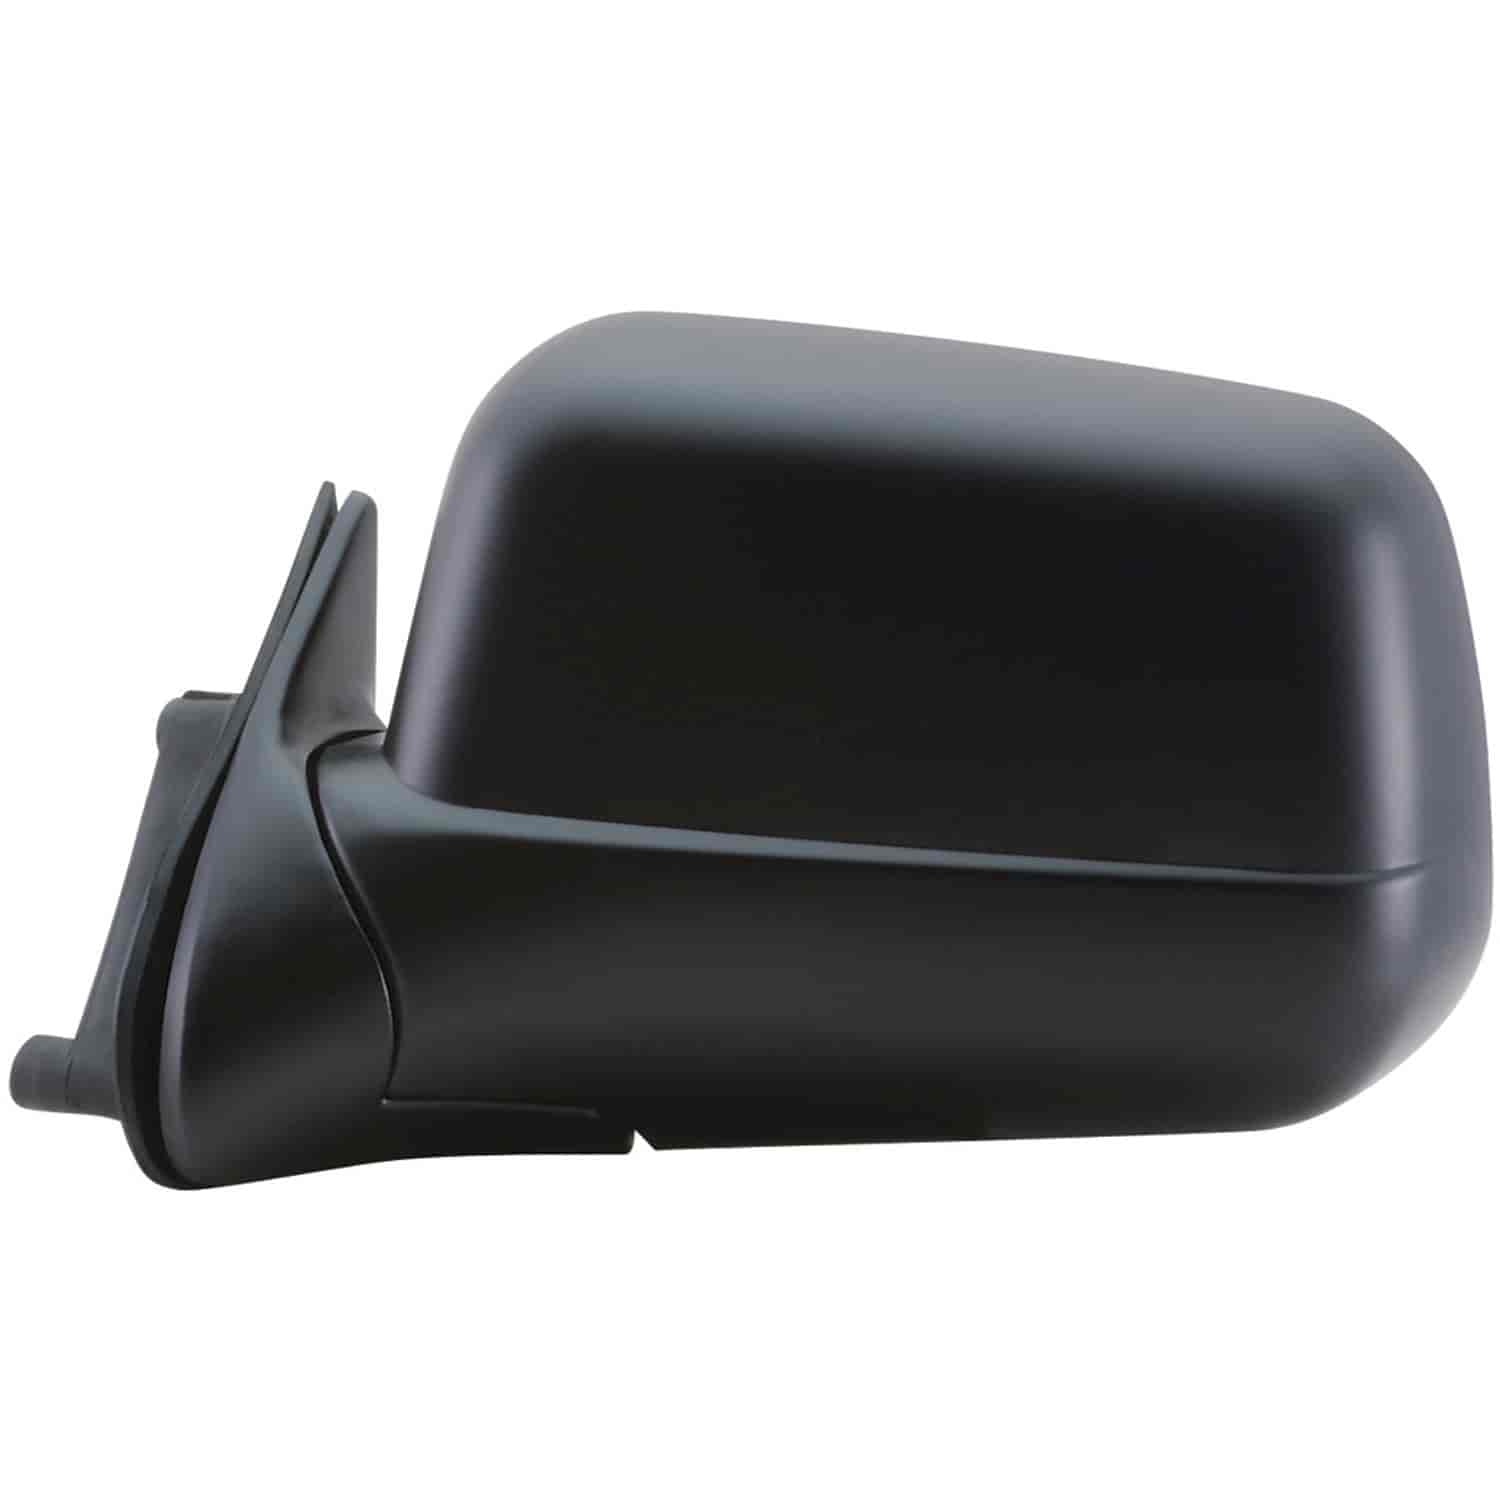 OEM Style Replacement mirror for 98-04 Nissan Frontier 00-04 Xterra driver side mirror tested to fit